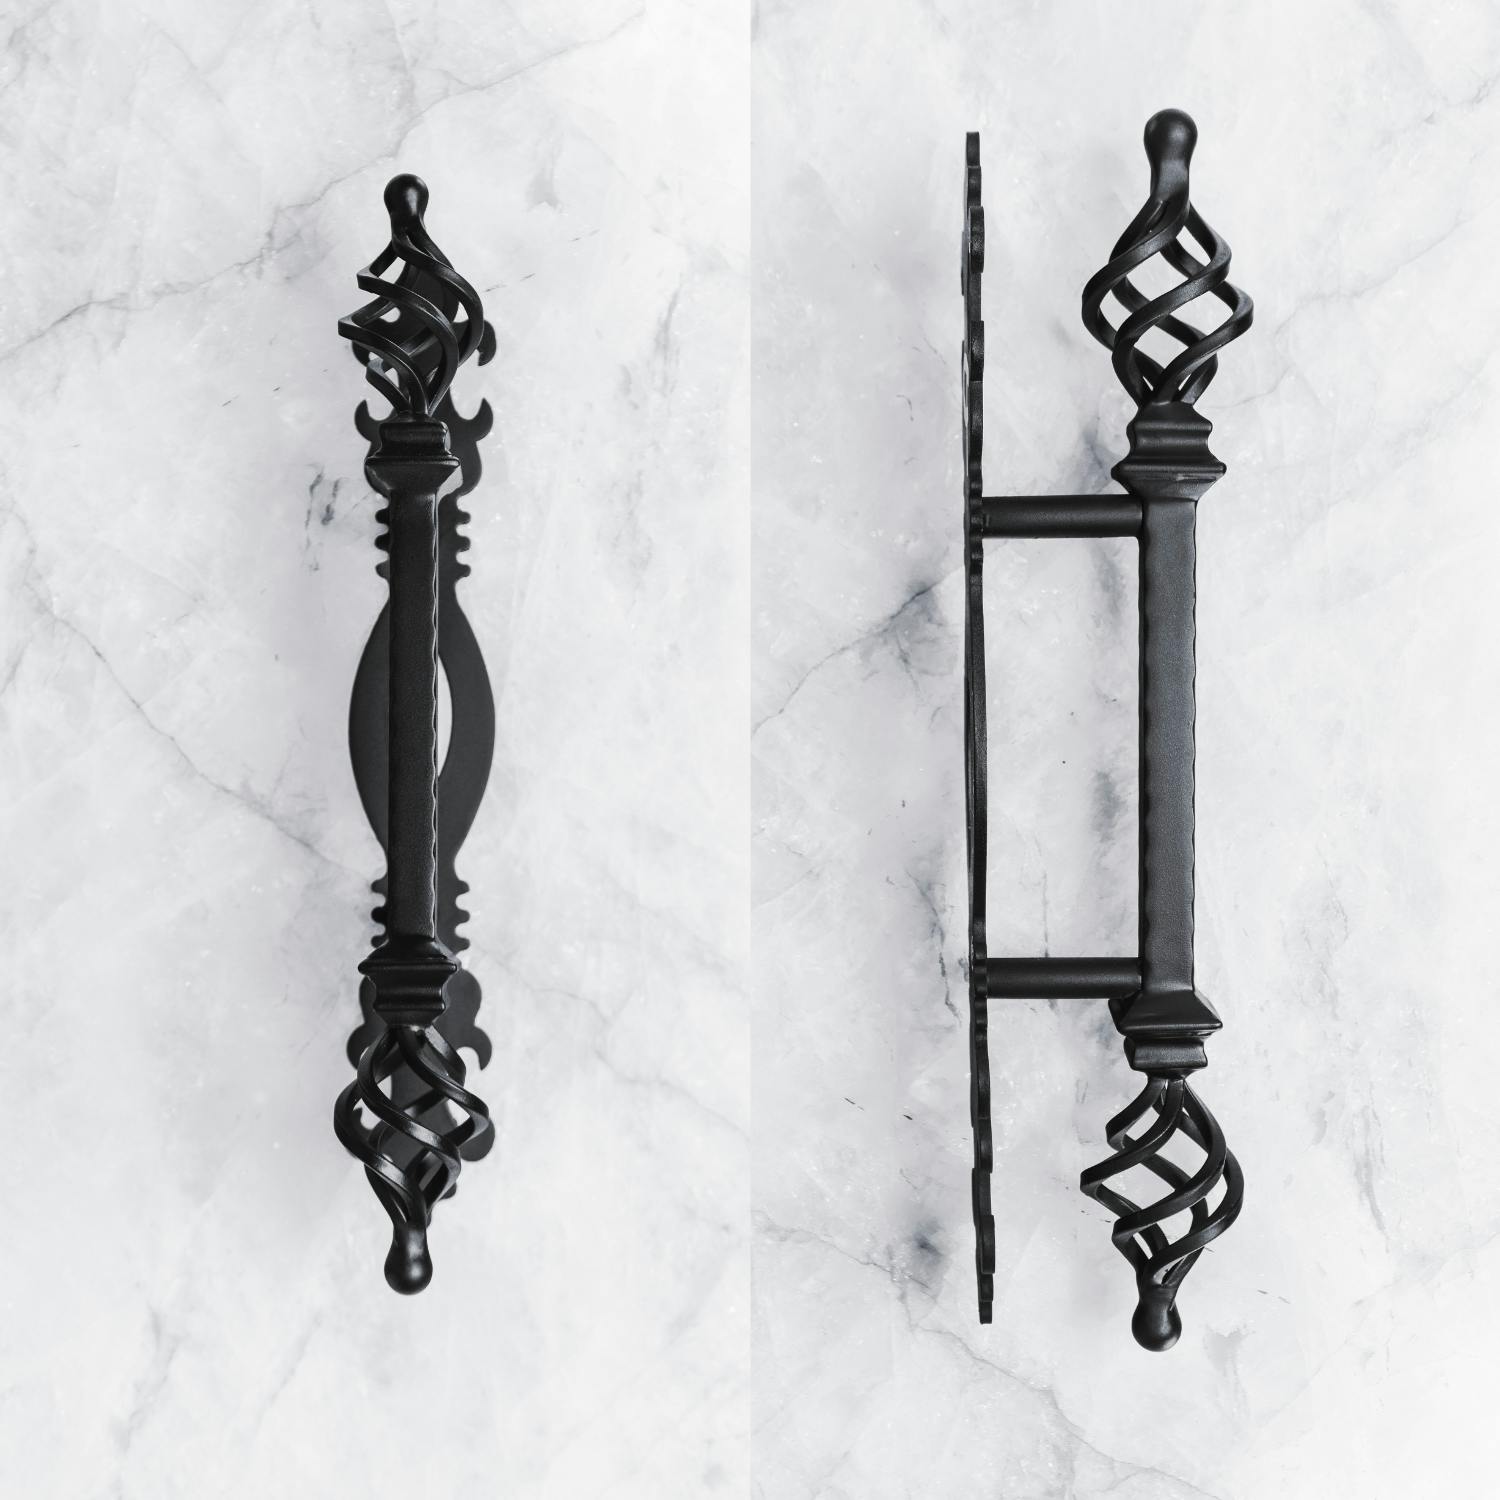 Artistic iron door handle with intricate metalwork and decorative accents